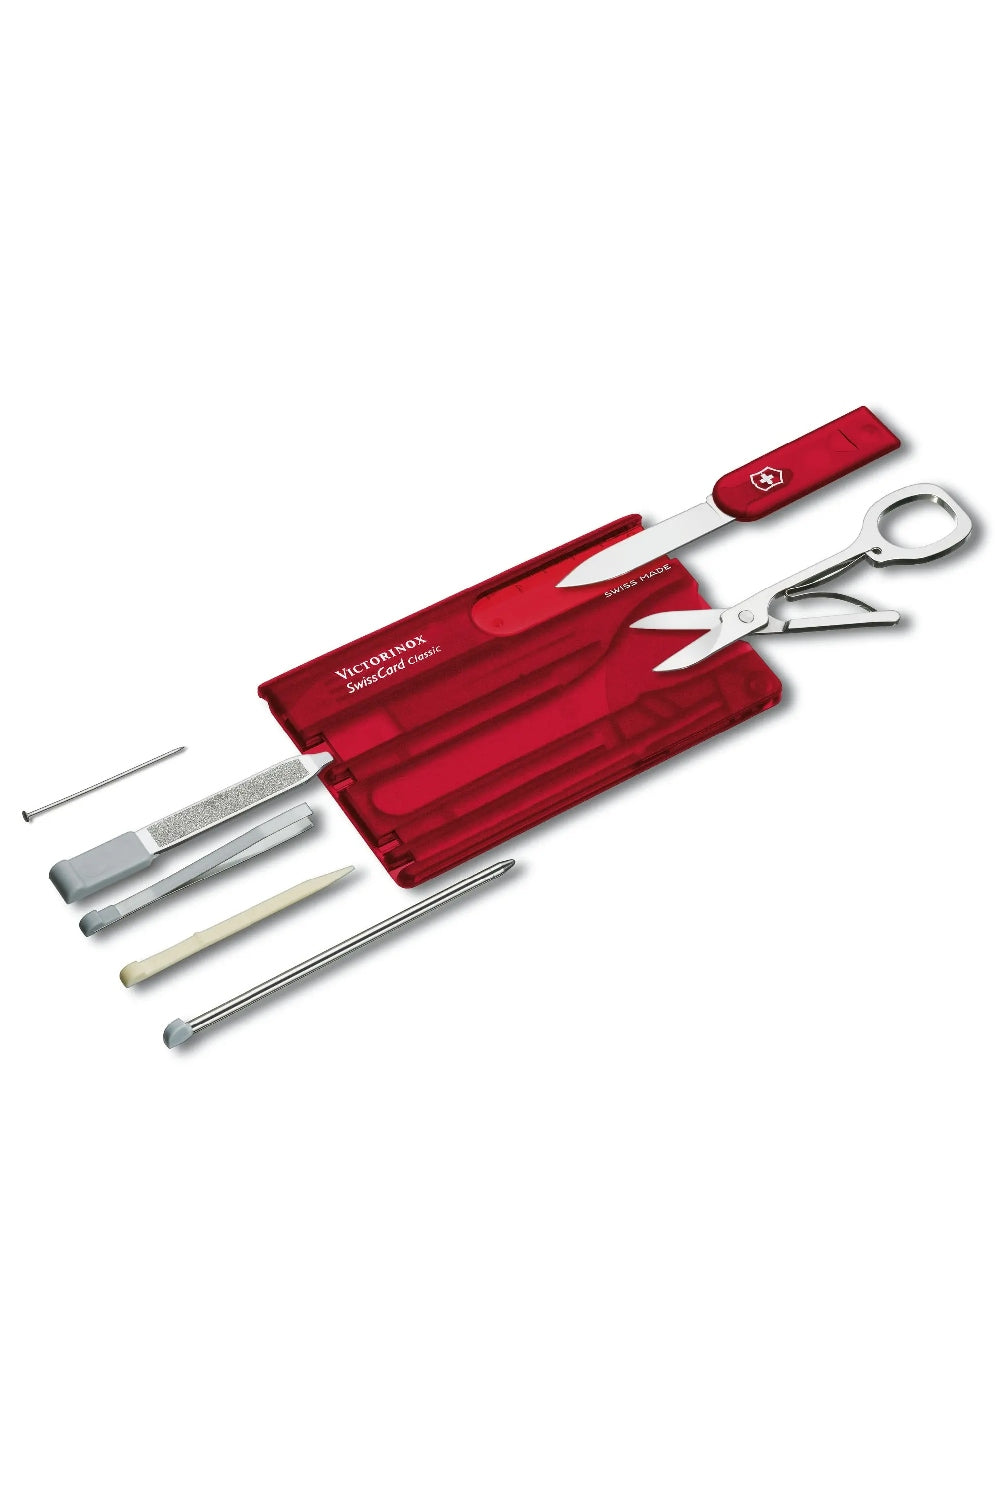 Victorinox Swiss Card Classic in Red Transparent 